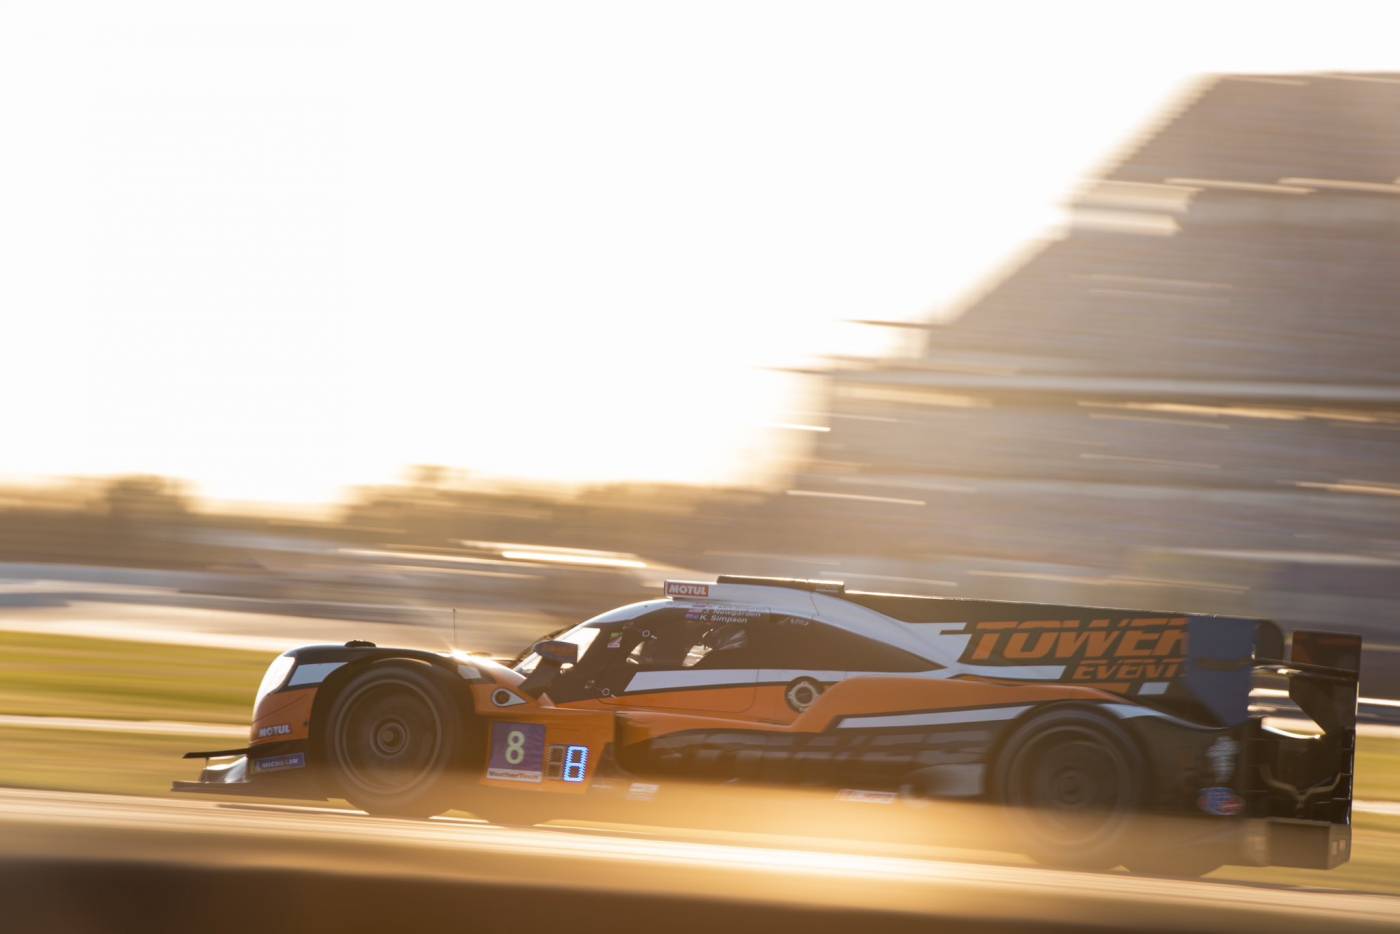 A first IMSA win and overall podium for Tower Motorsports at the 12 Hours of Sebring!